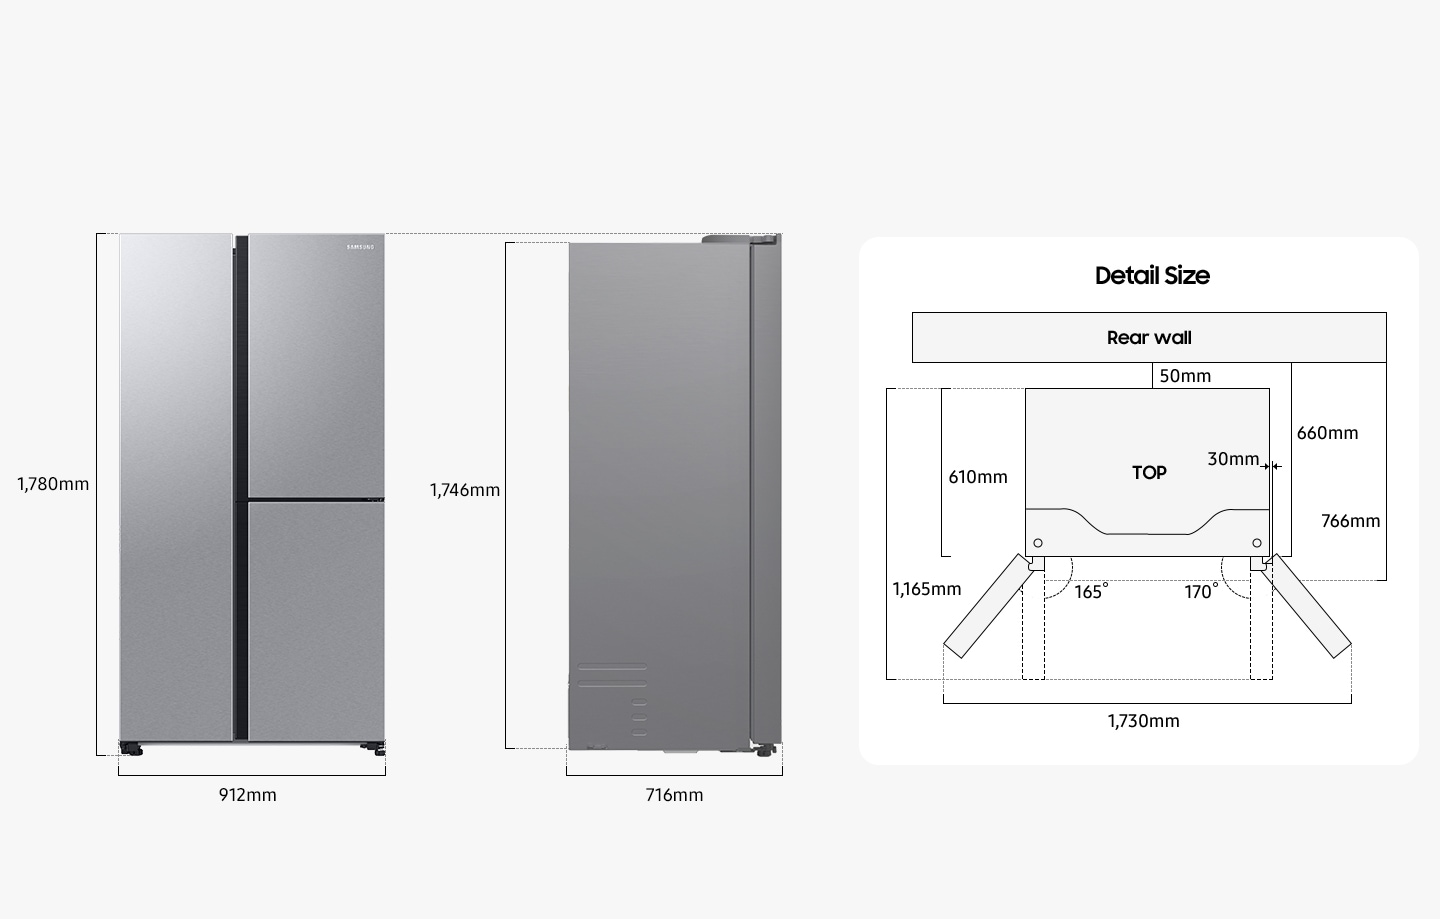 The Refrigerator is 1,780mm in height including the door, 912mm in width, 716mm in depth, and 1,746mm in height excluding the door from the rear. When installing, the refrigerator must be at least 50mm away from the back wall. The depth including the space between the refrigerator and the back wall and the refrigerator body is 660mm, and the depth including the space between the refrigerator and the back wall and the refrigerator body and the refrigerator door is 766mm.  The depth of installed Refrigerator excluding the door closed is 610mm, and the depth of the installed refrigerator including the door opened to 90 degrees is 1,165mm and the refrigerator door also protrudes 30mm from the refrigerator body. The right door opens to 165 degrees, and the left door opens to 170 degrees. The width when both doors are fully opened is 1,730mm.